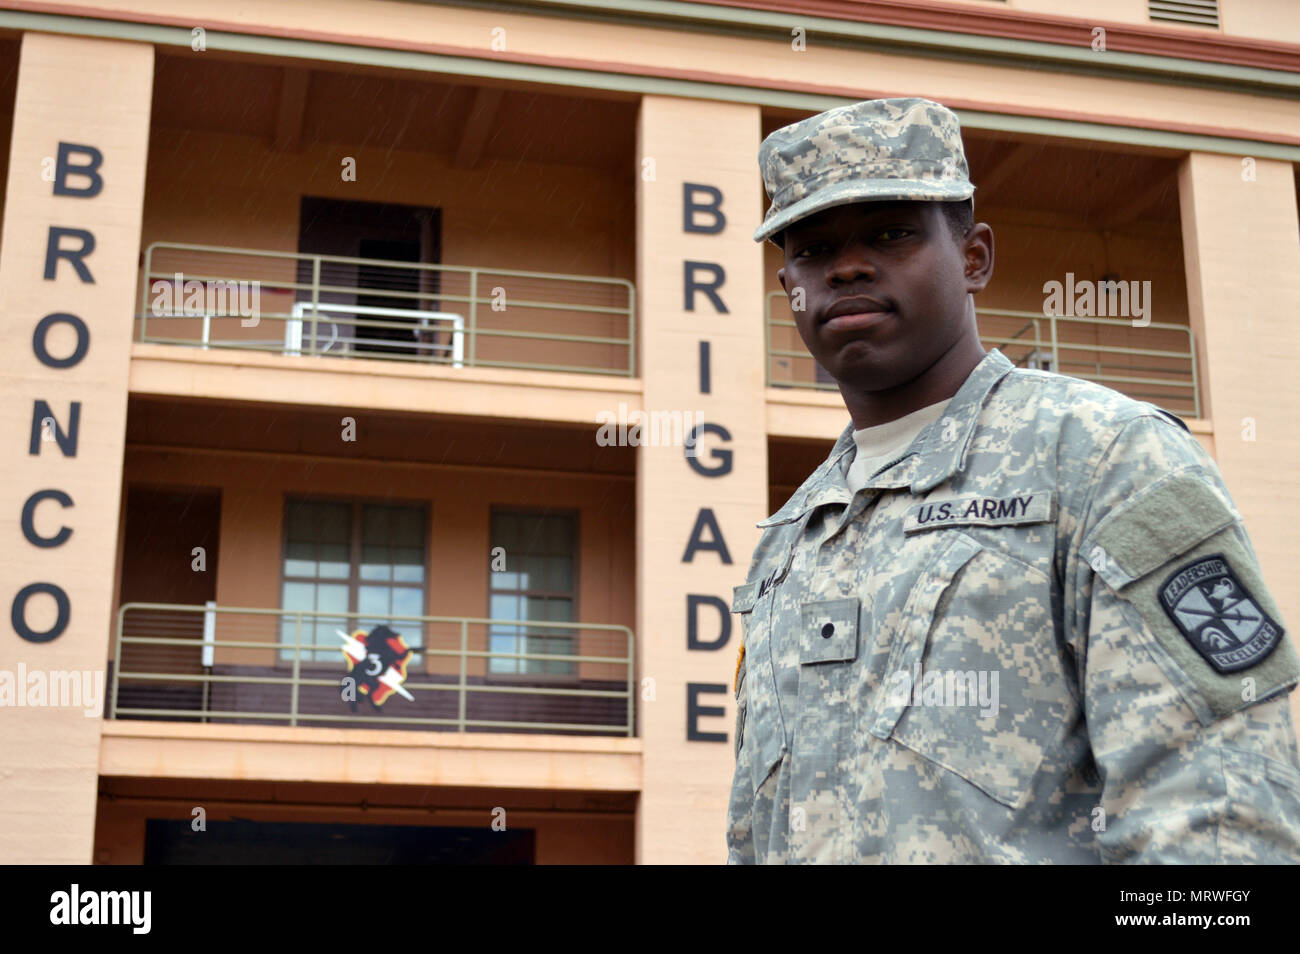 Cadet Ronald Mais, a Reserve Officer Training Corps (ROTC) cadet from the F...